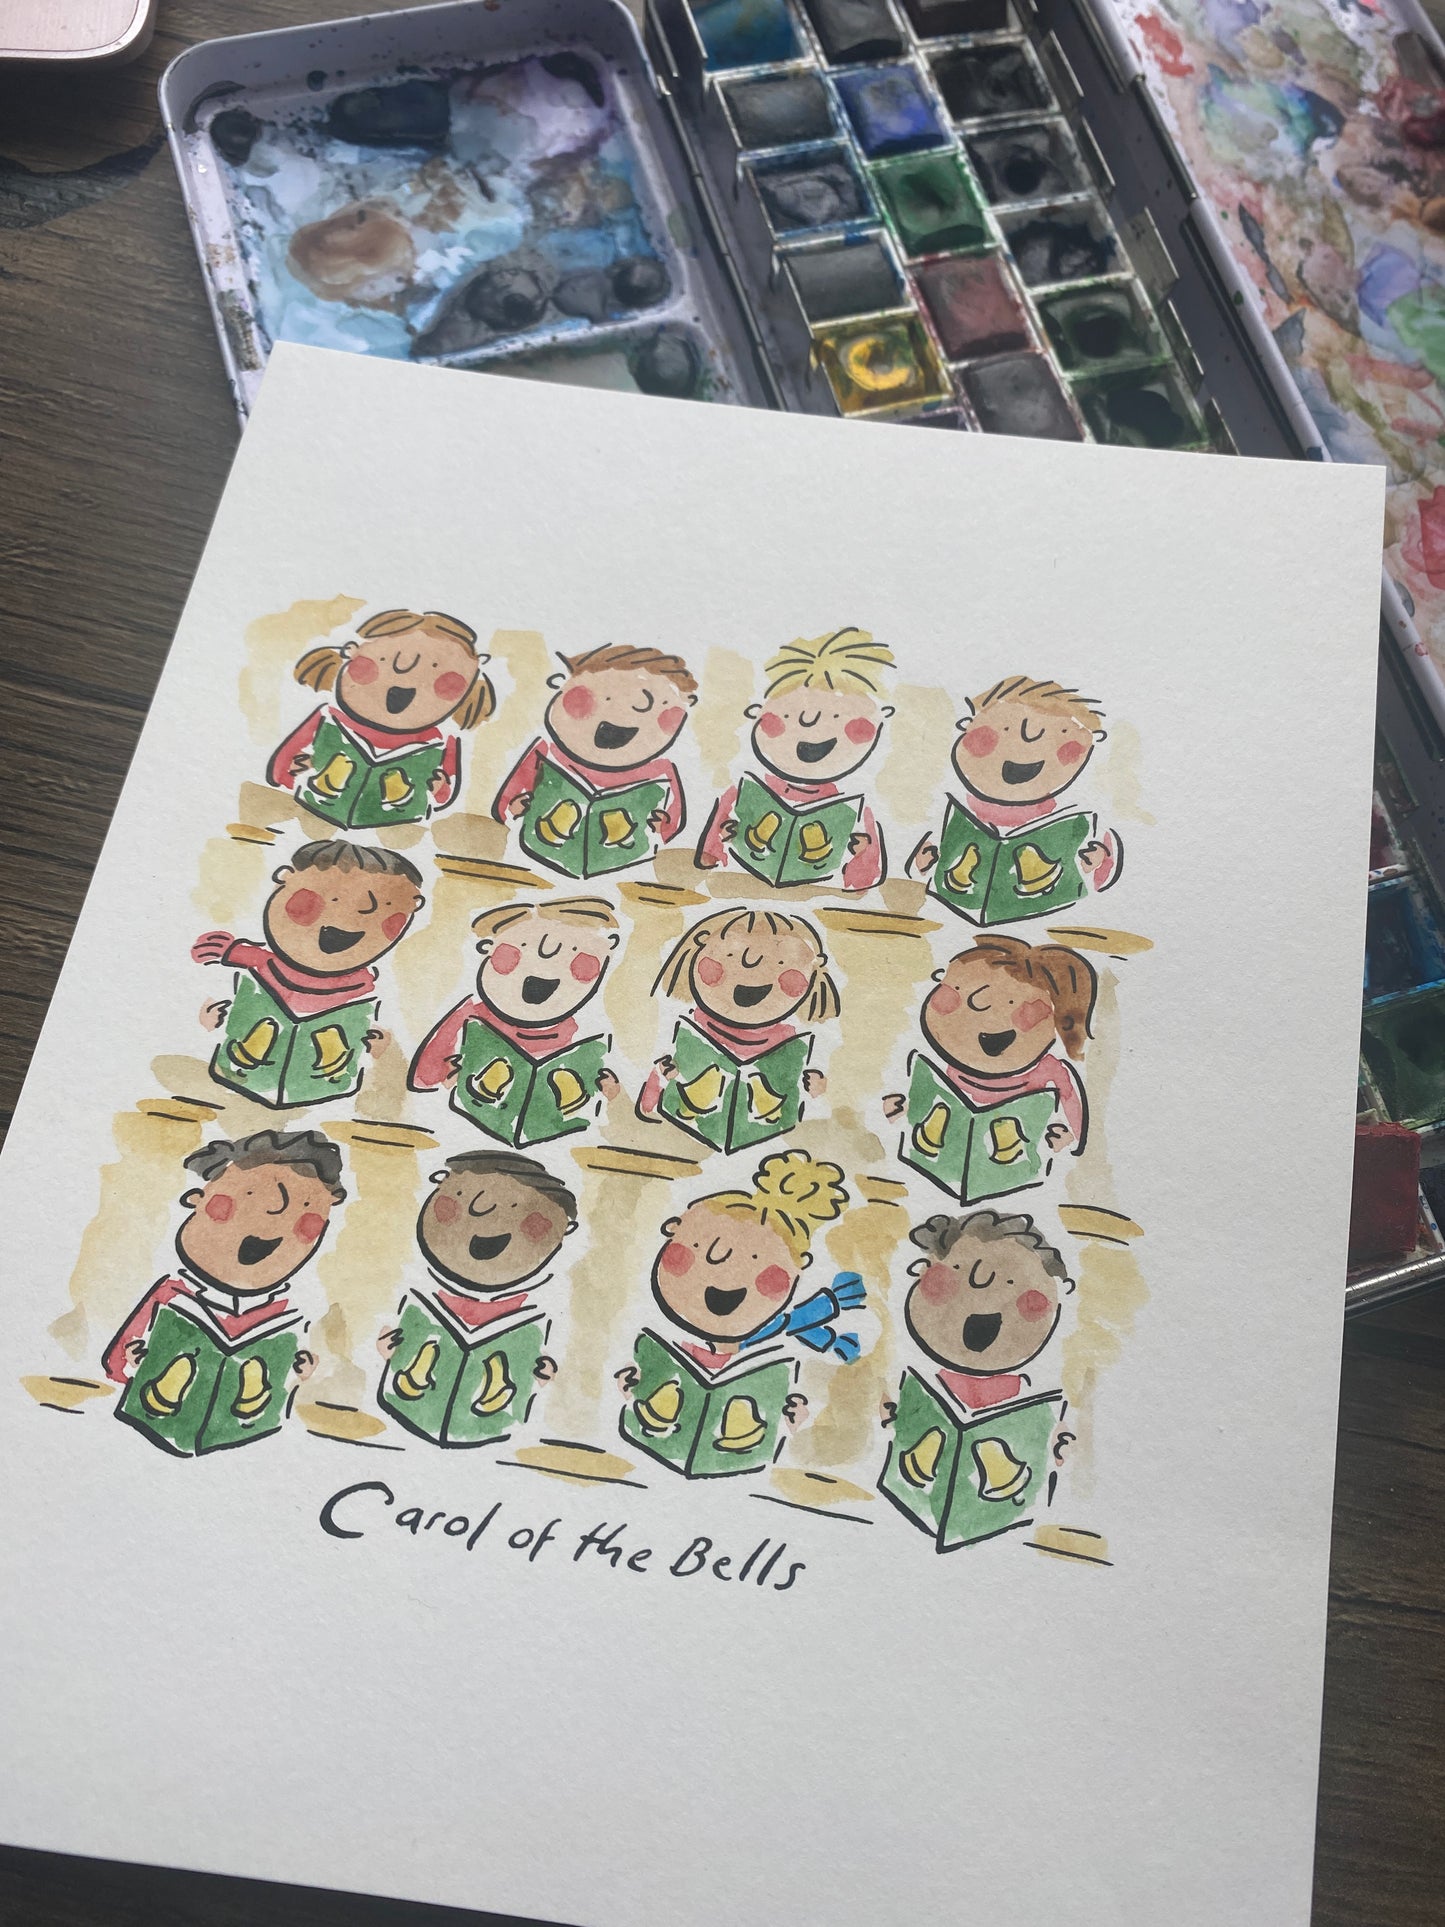 Carol of the bells original illustration in pen and ink and watercolour by Rosie Brooks